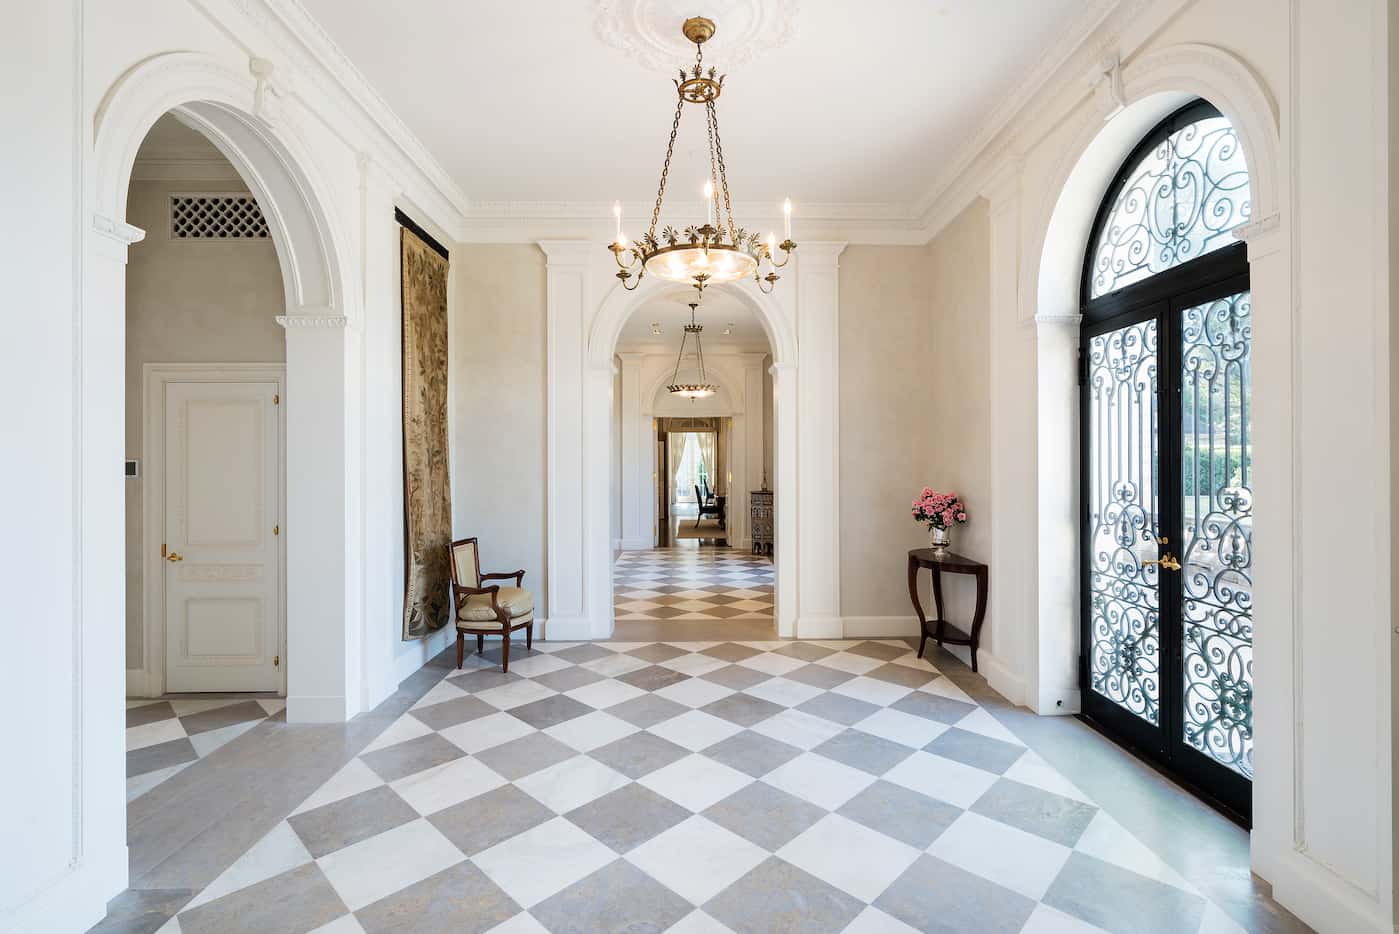 Original light fixtures and floors adorn the front entry halls of the historic Crespi Estate.